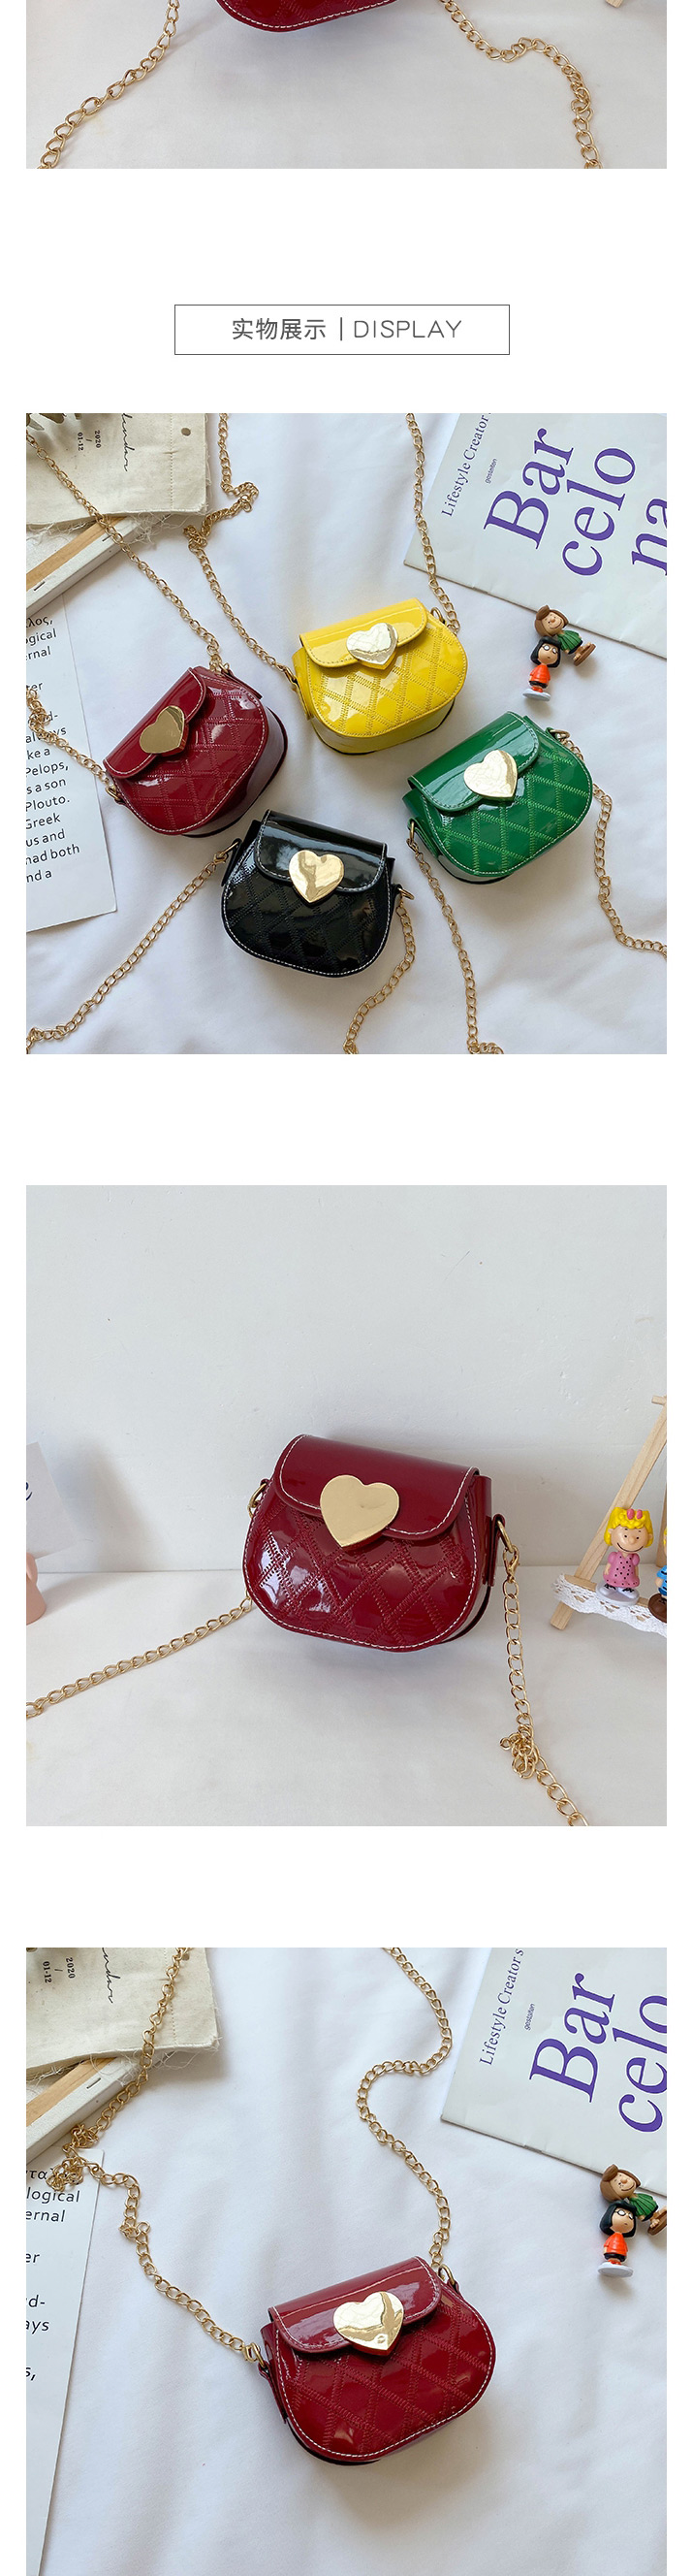 Fashion Yellow Childrens One-shoulder Diagonal Bag With Chain Love Lock,Shoulder bags